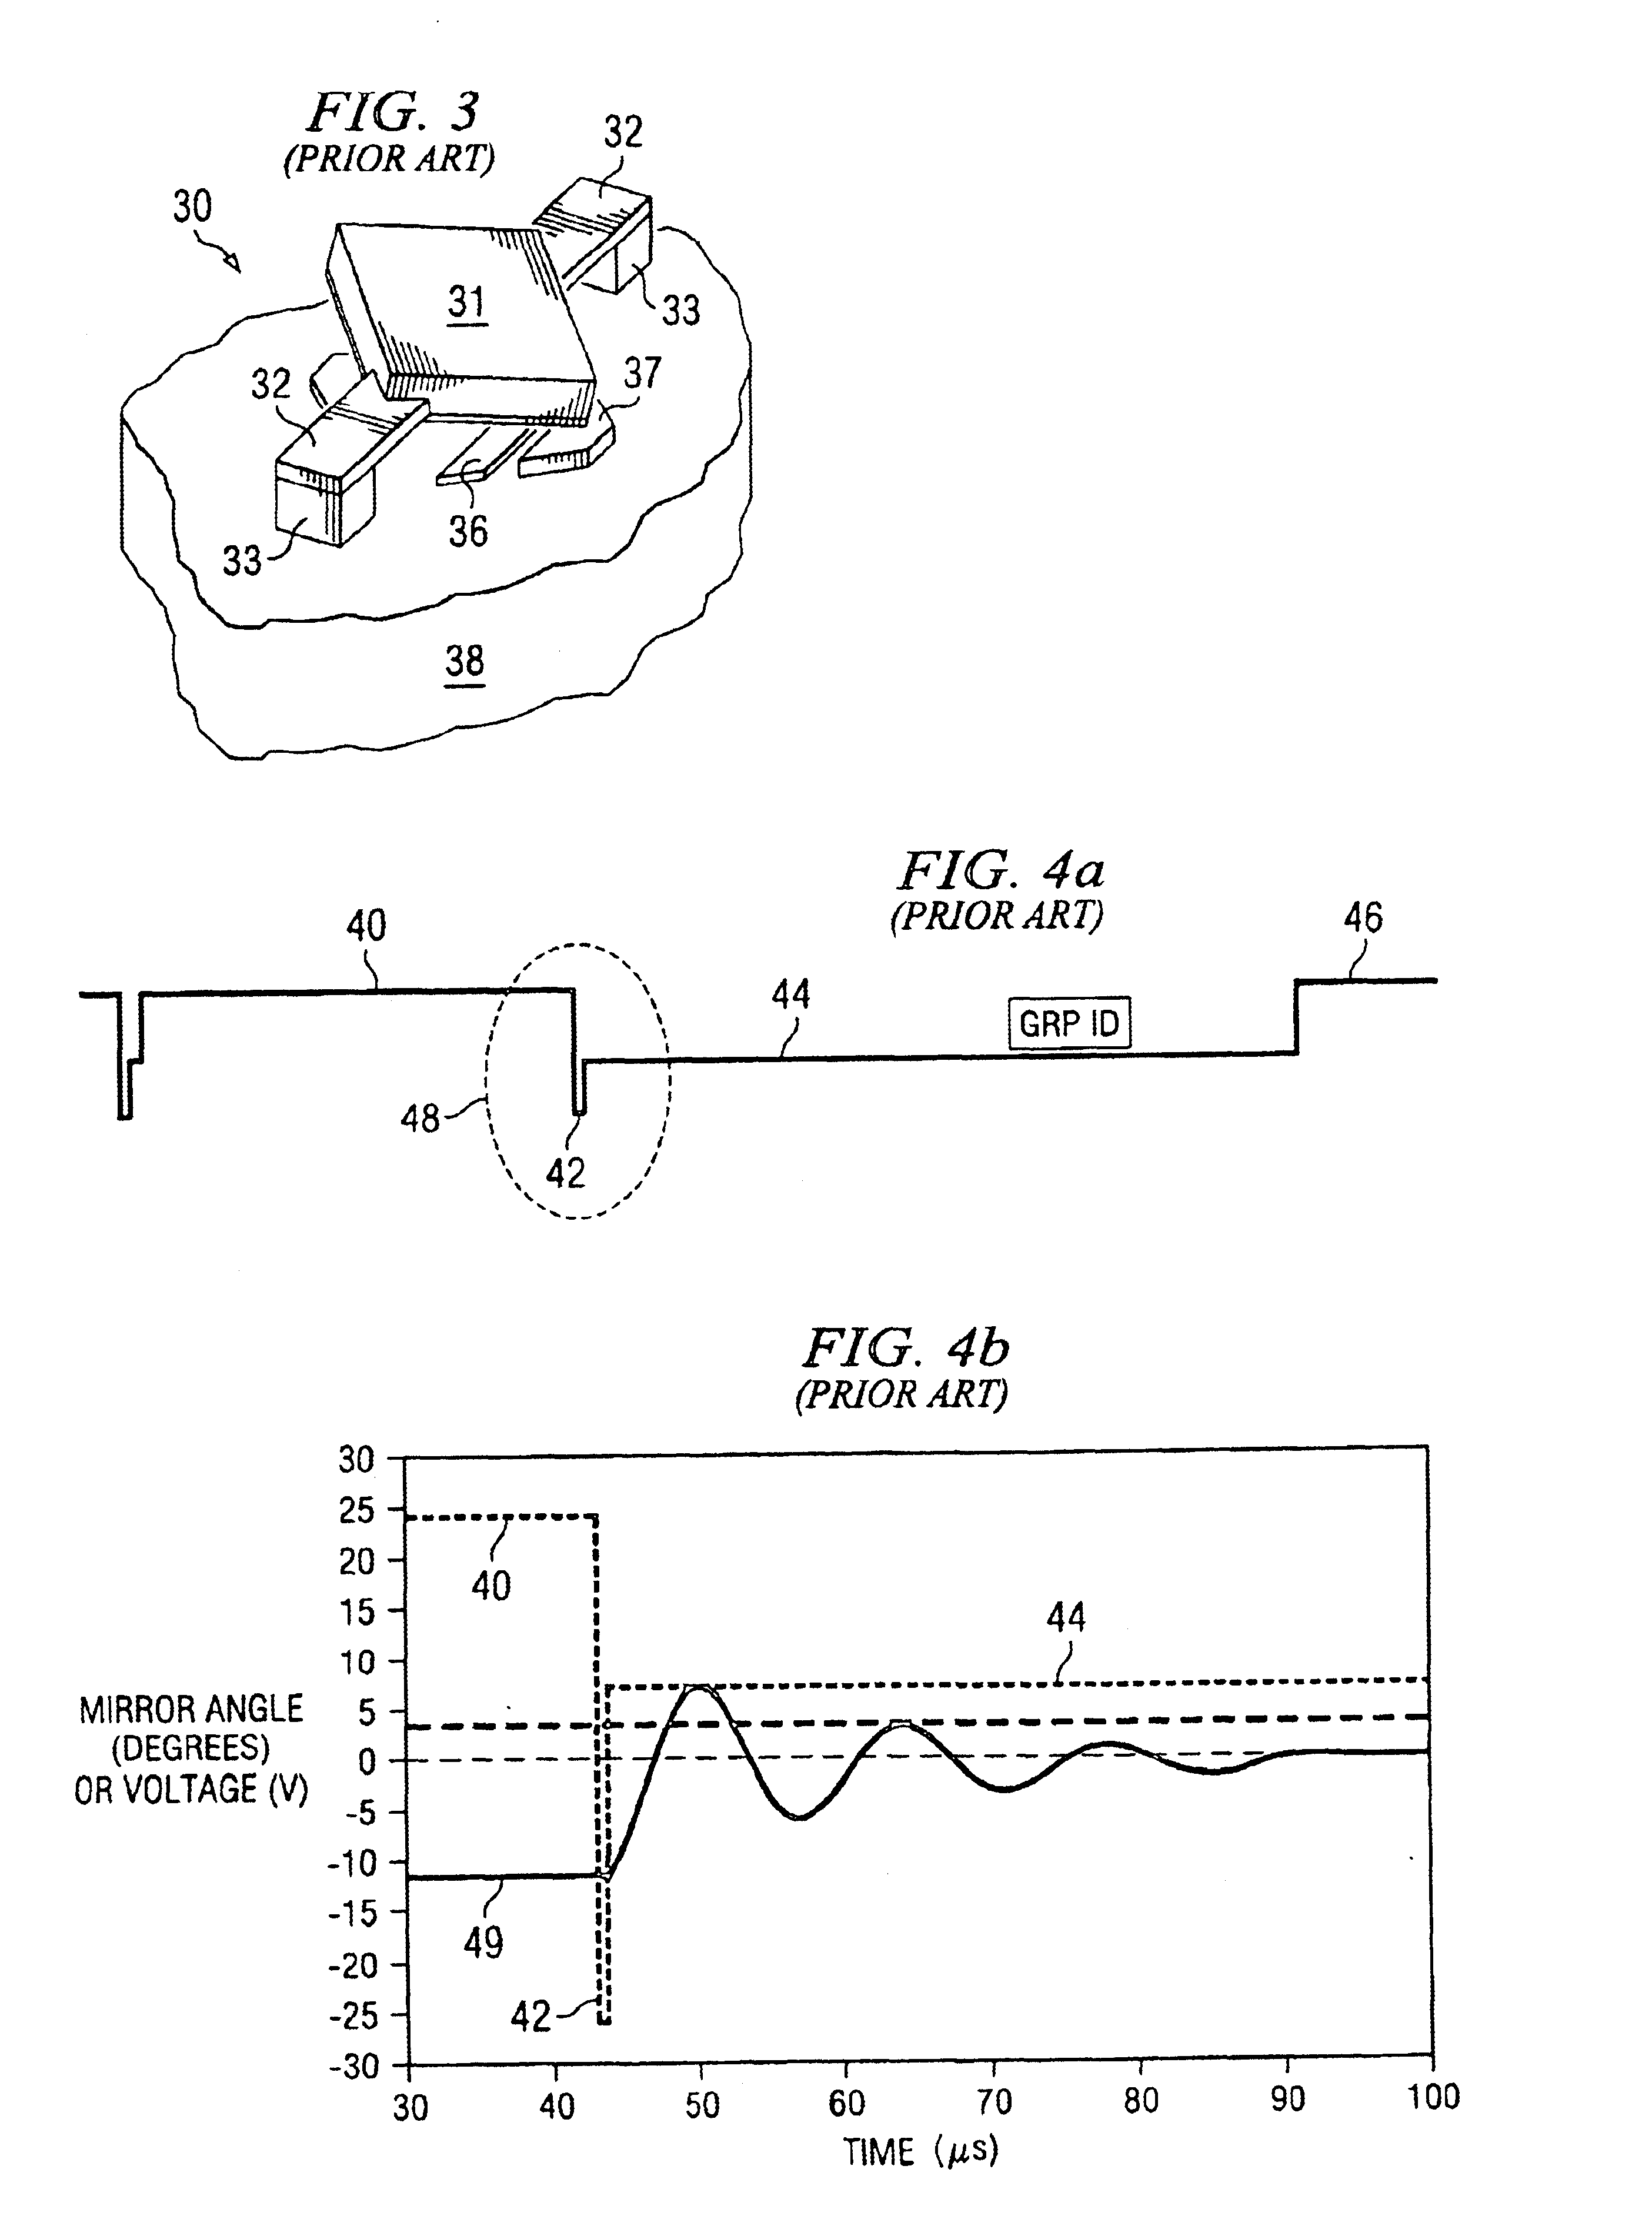 Damped control of a micromechanical device